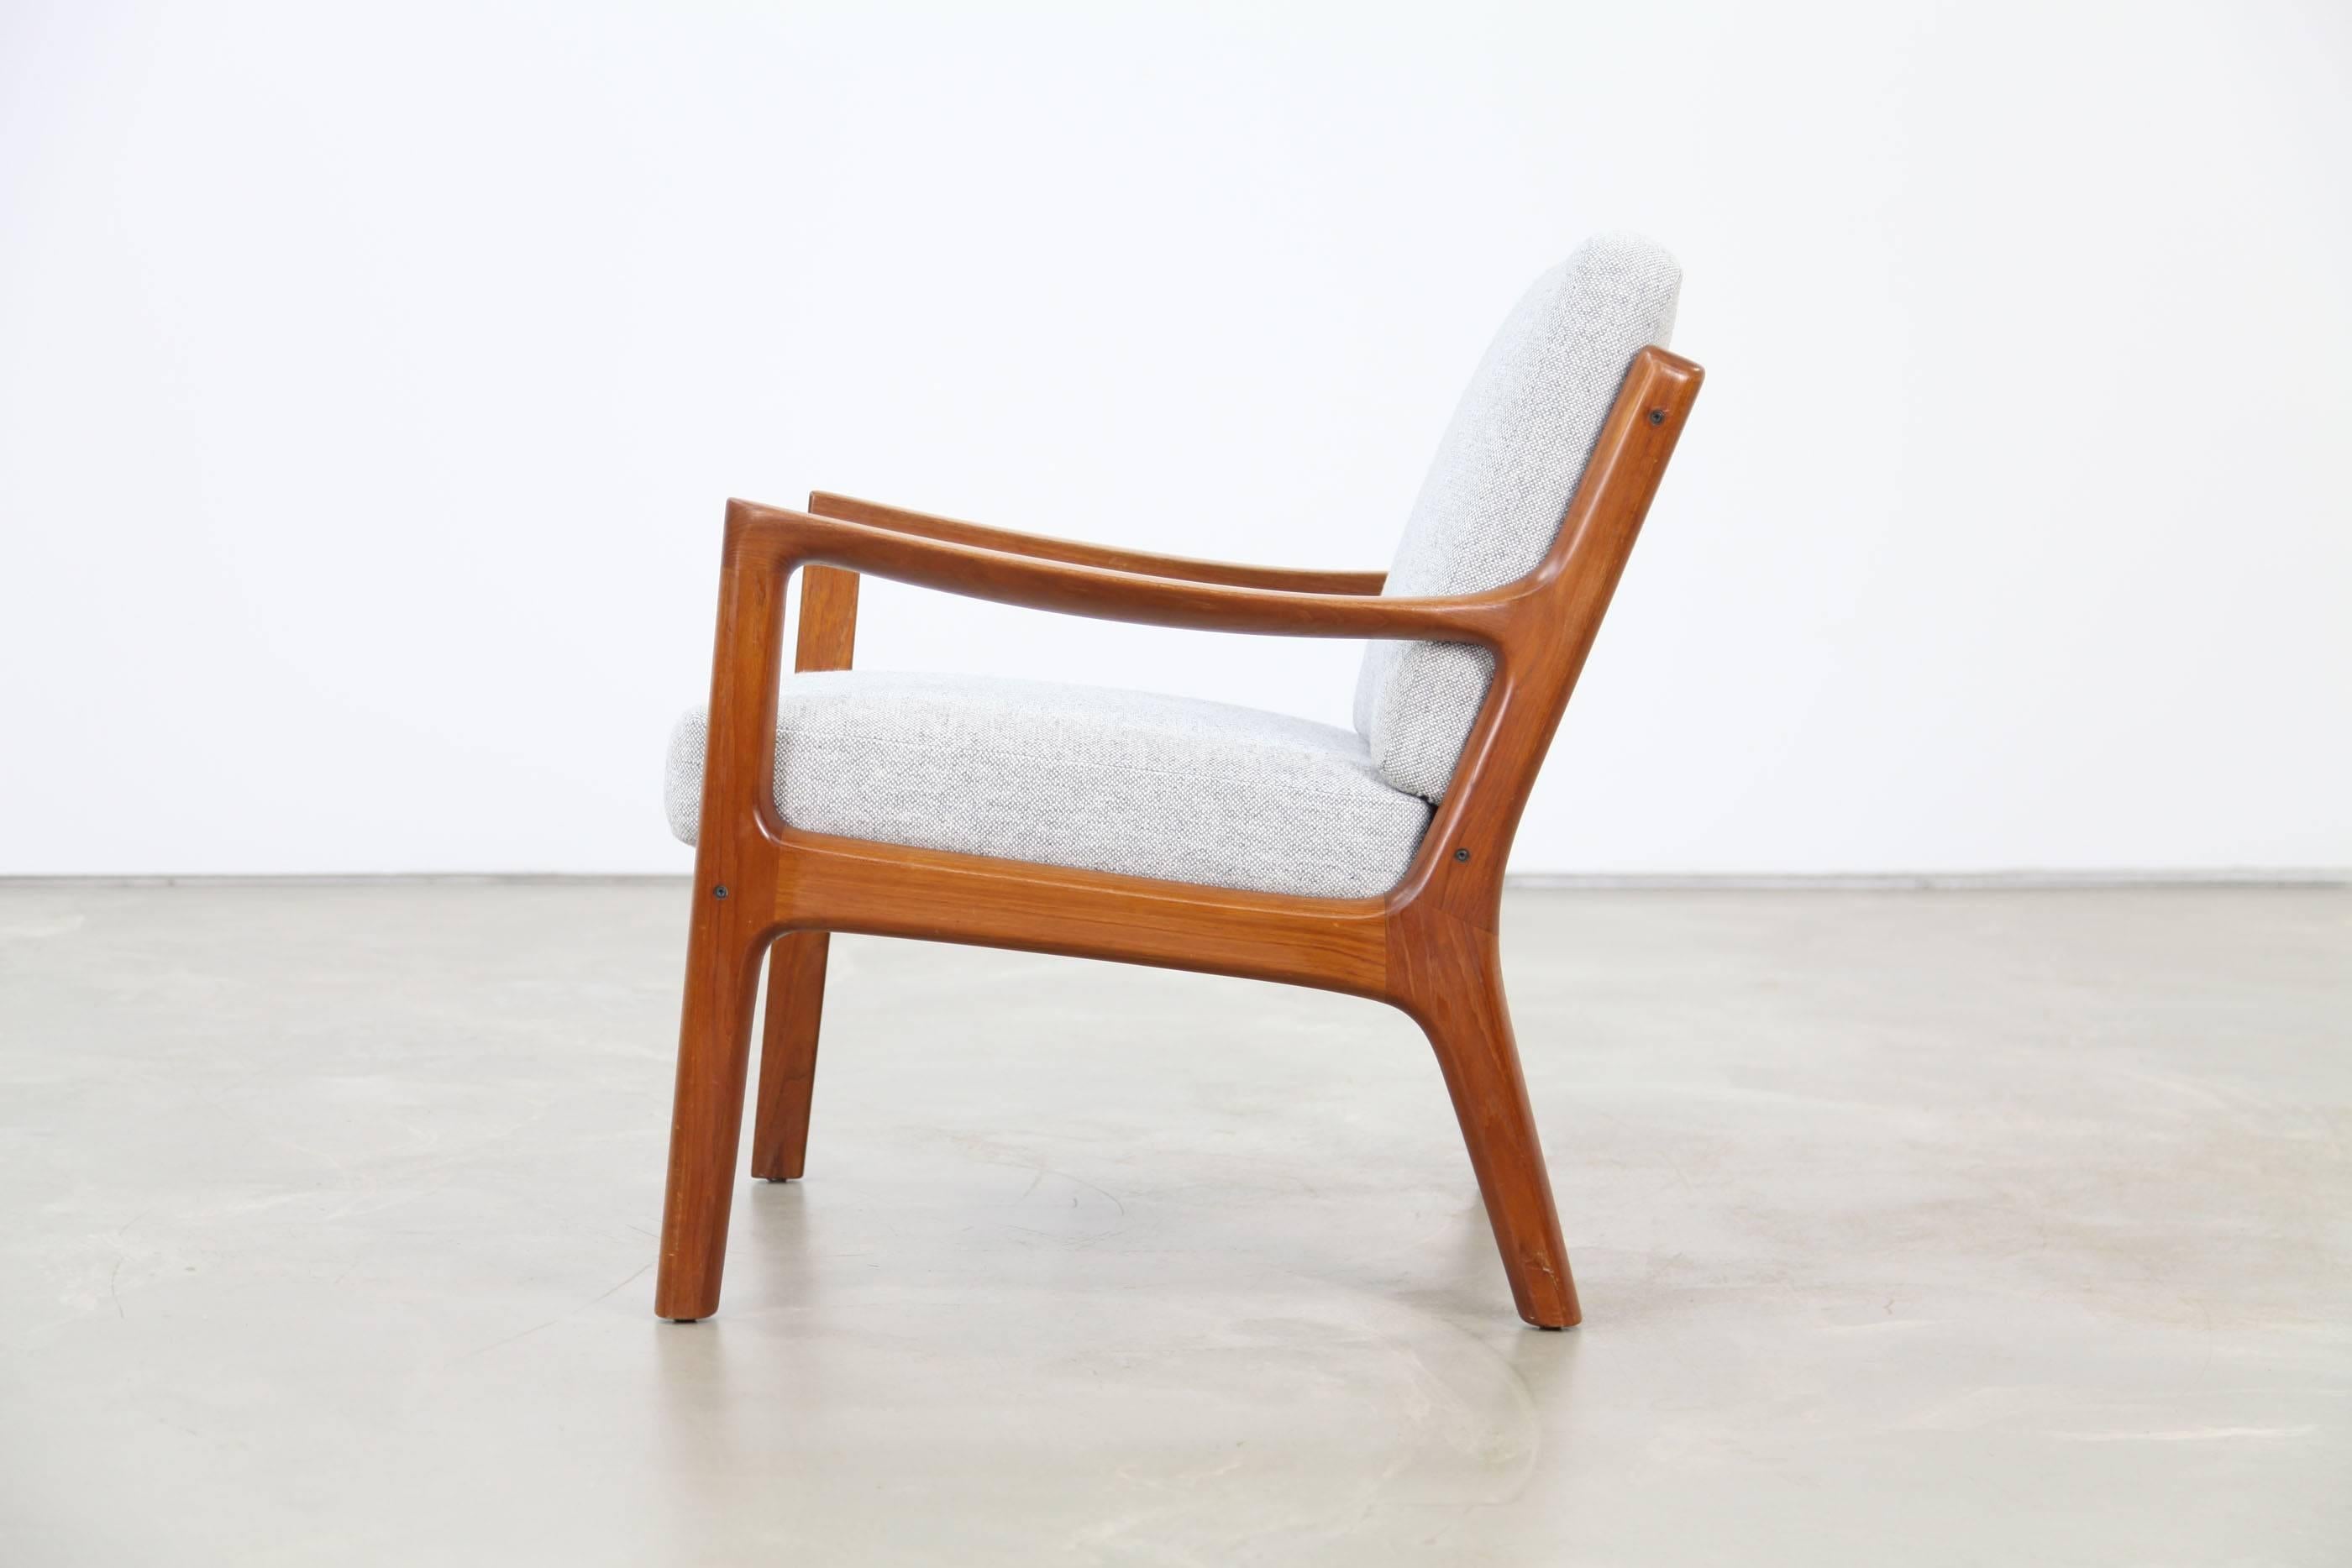 Easy chair by the Danish designer Ole Wanscher for France & Søn. High quality and graceful teakwood frame. The cushions were re-upholstered with the fabric Hallingdal by Kvadrat. Great used condition.